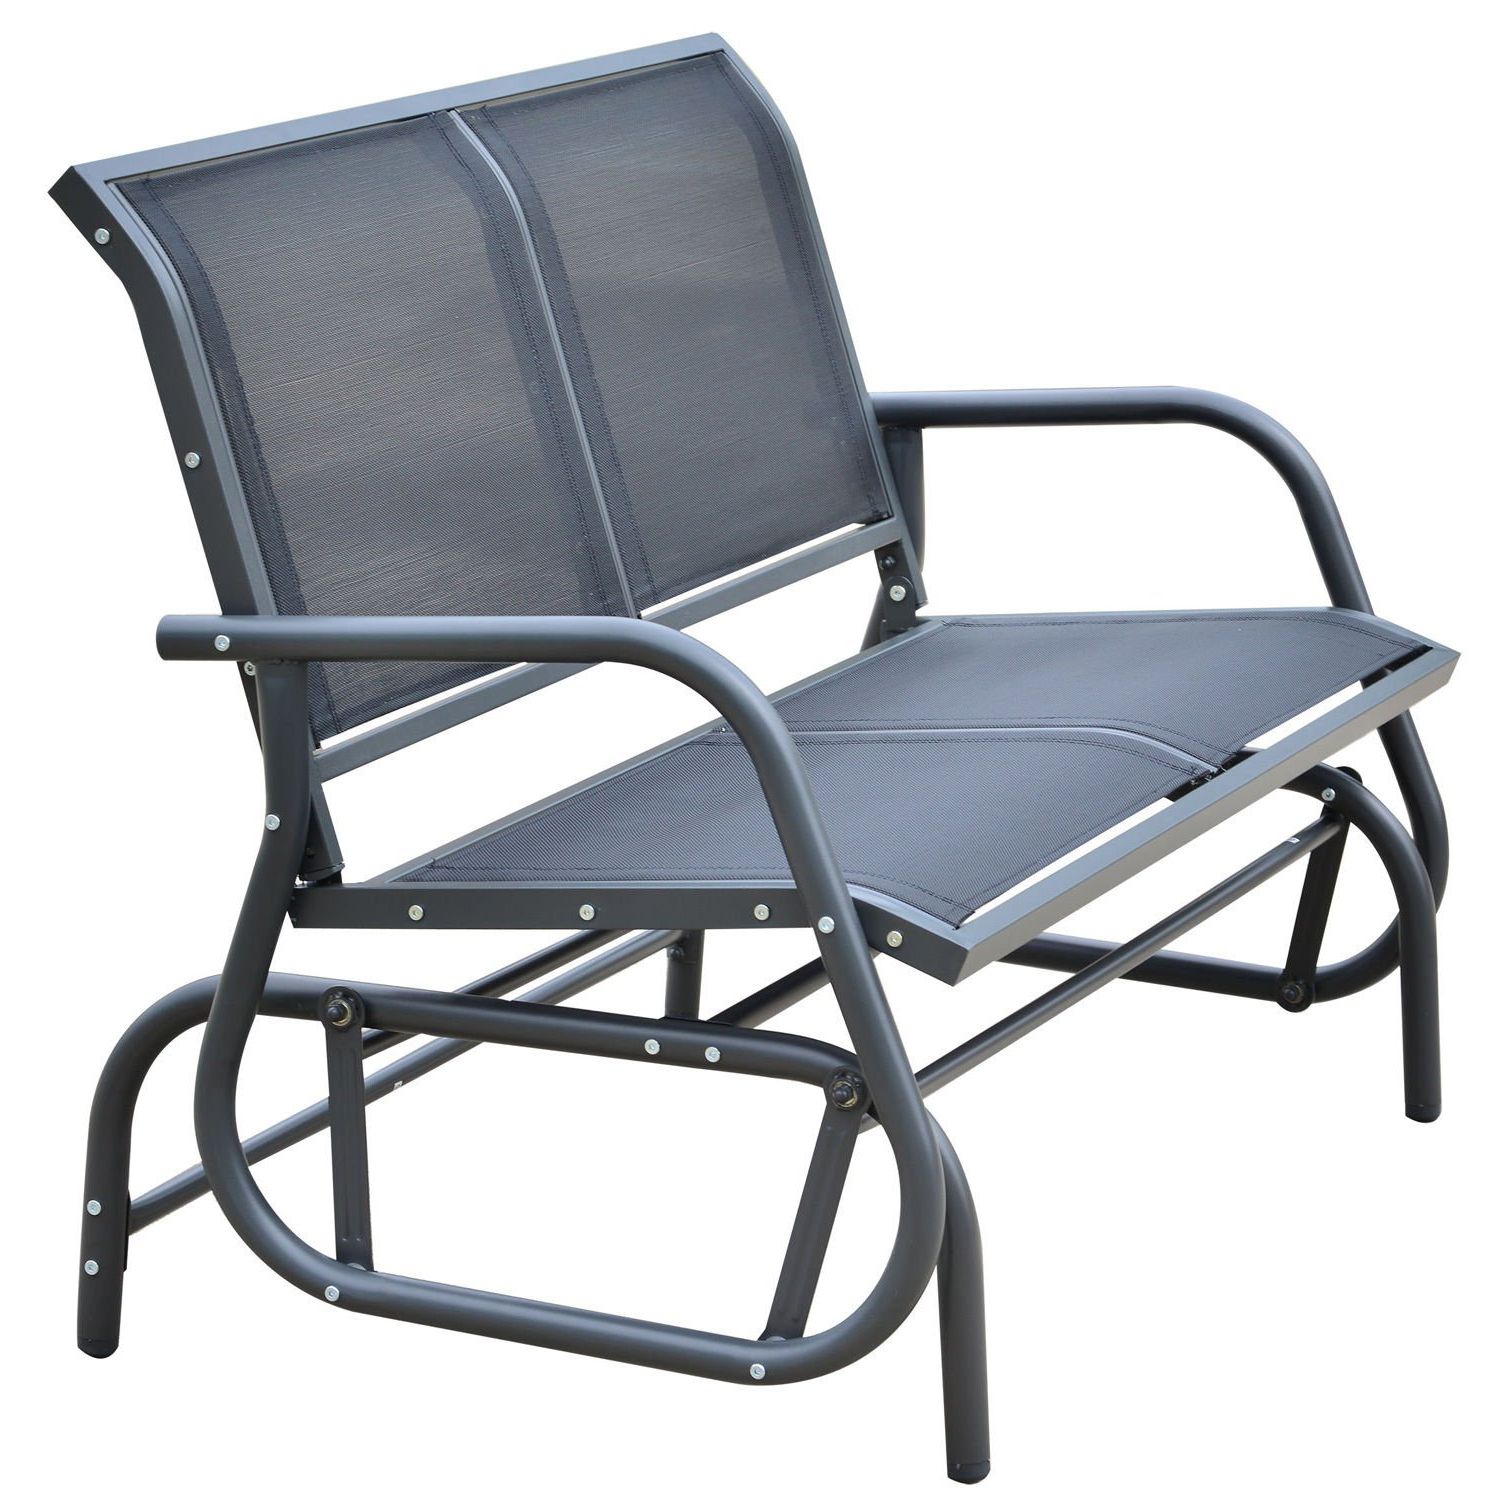 Padded Sling Double Gliders In 2019 Amazon : Patio Garden Glider Bench 2 Person Double Swing (View 30 of 30)